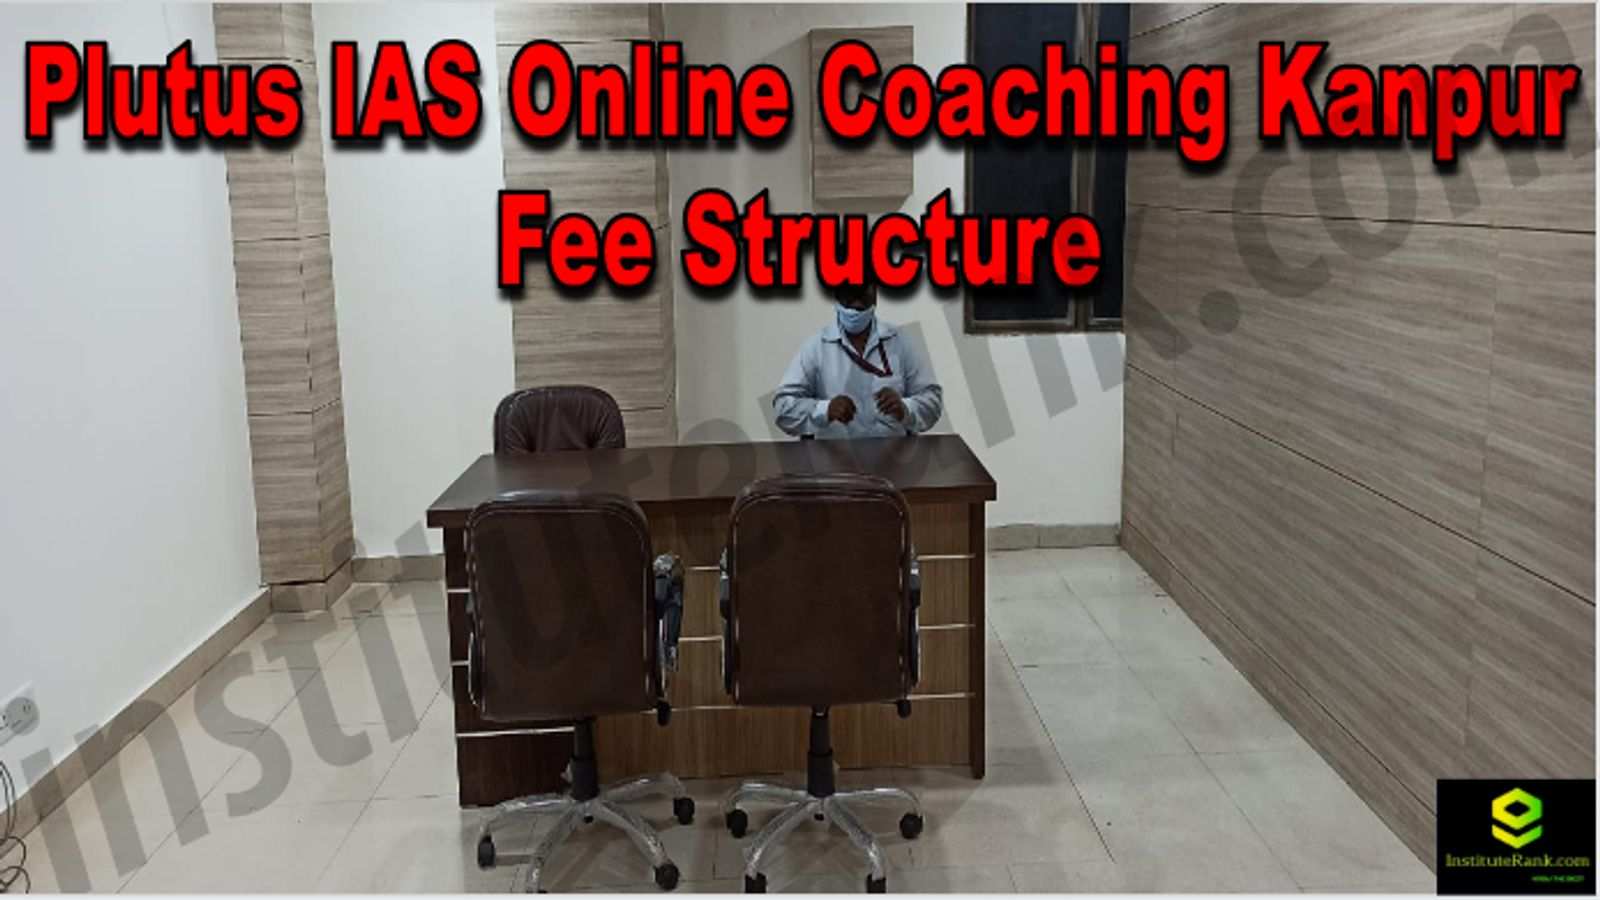 Plutus IAS Online Coaching Kanpur Reviews Fee Structure